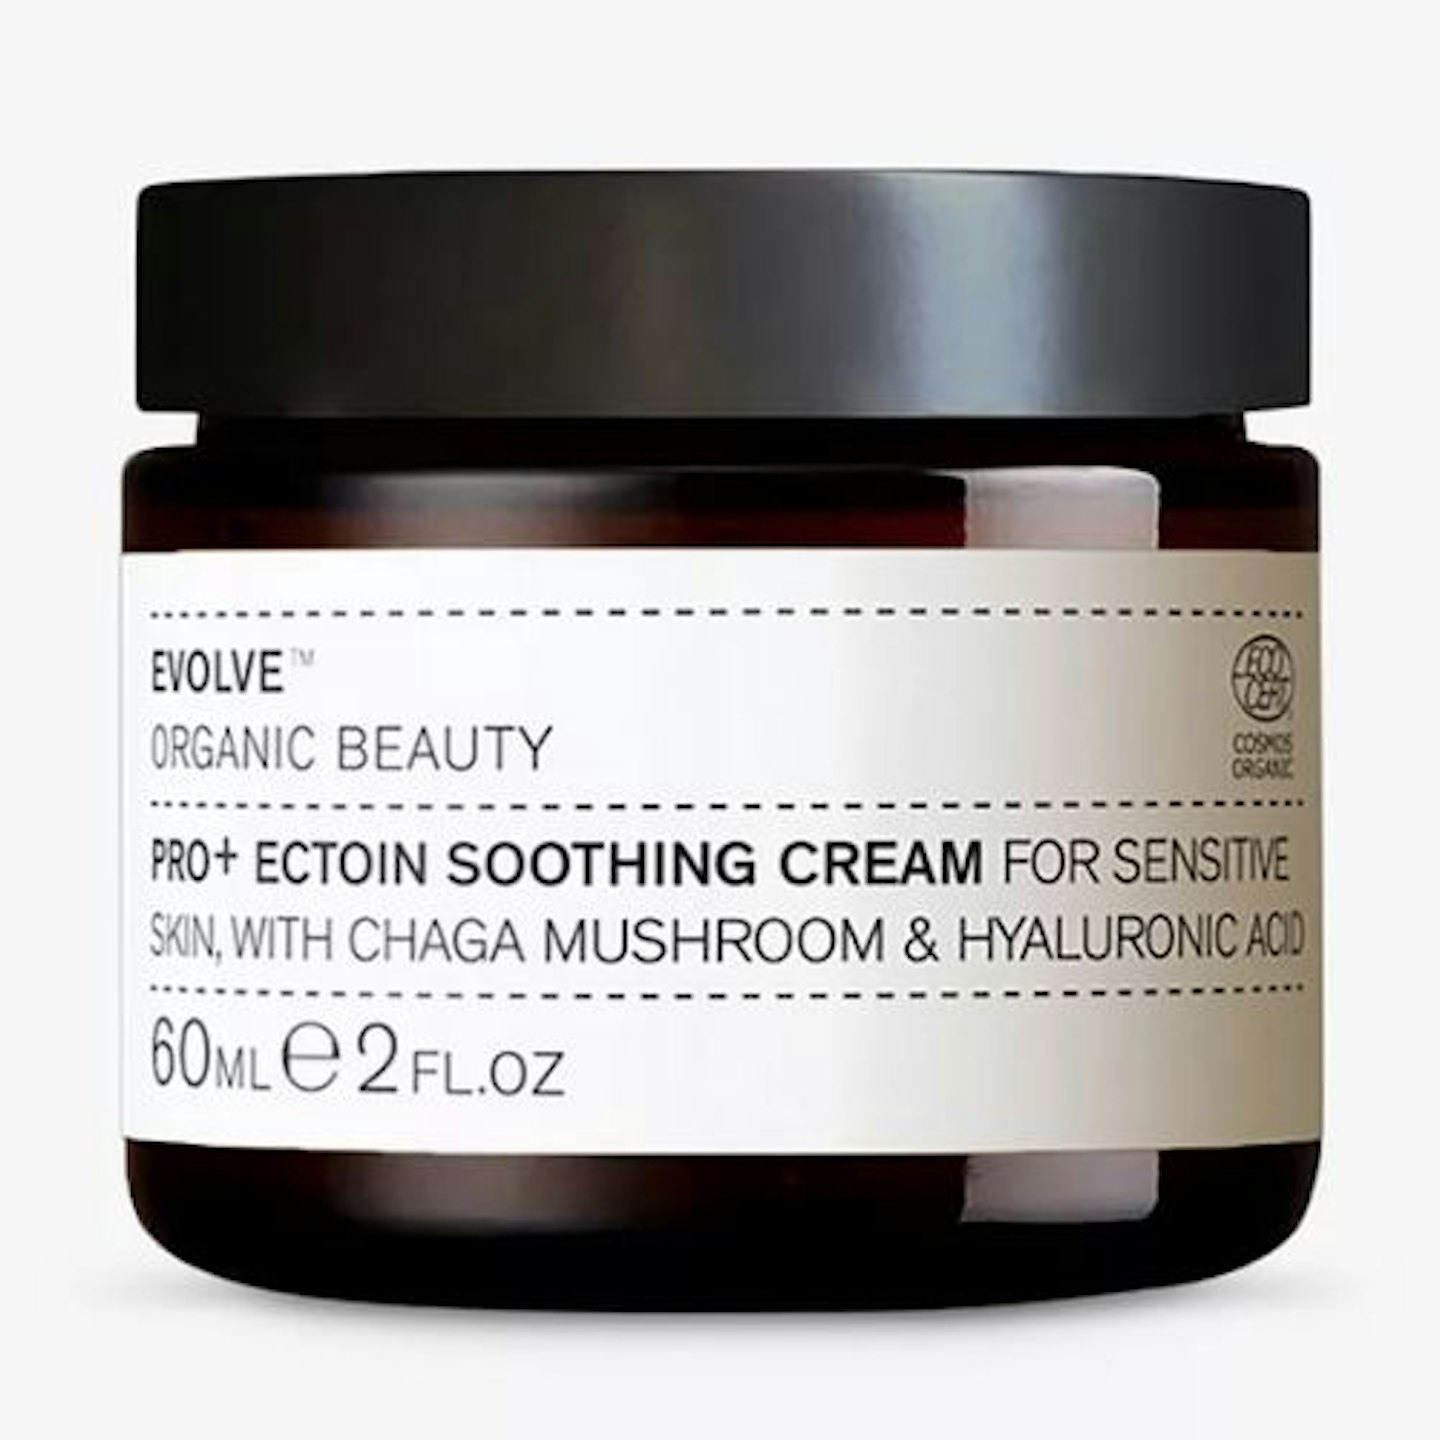 Evolve Organic Beauty Pro+ Ectoin Soothing Cream